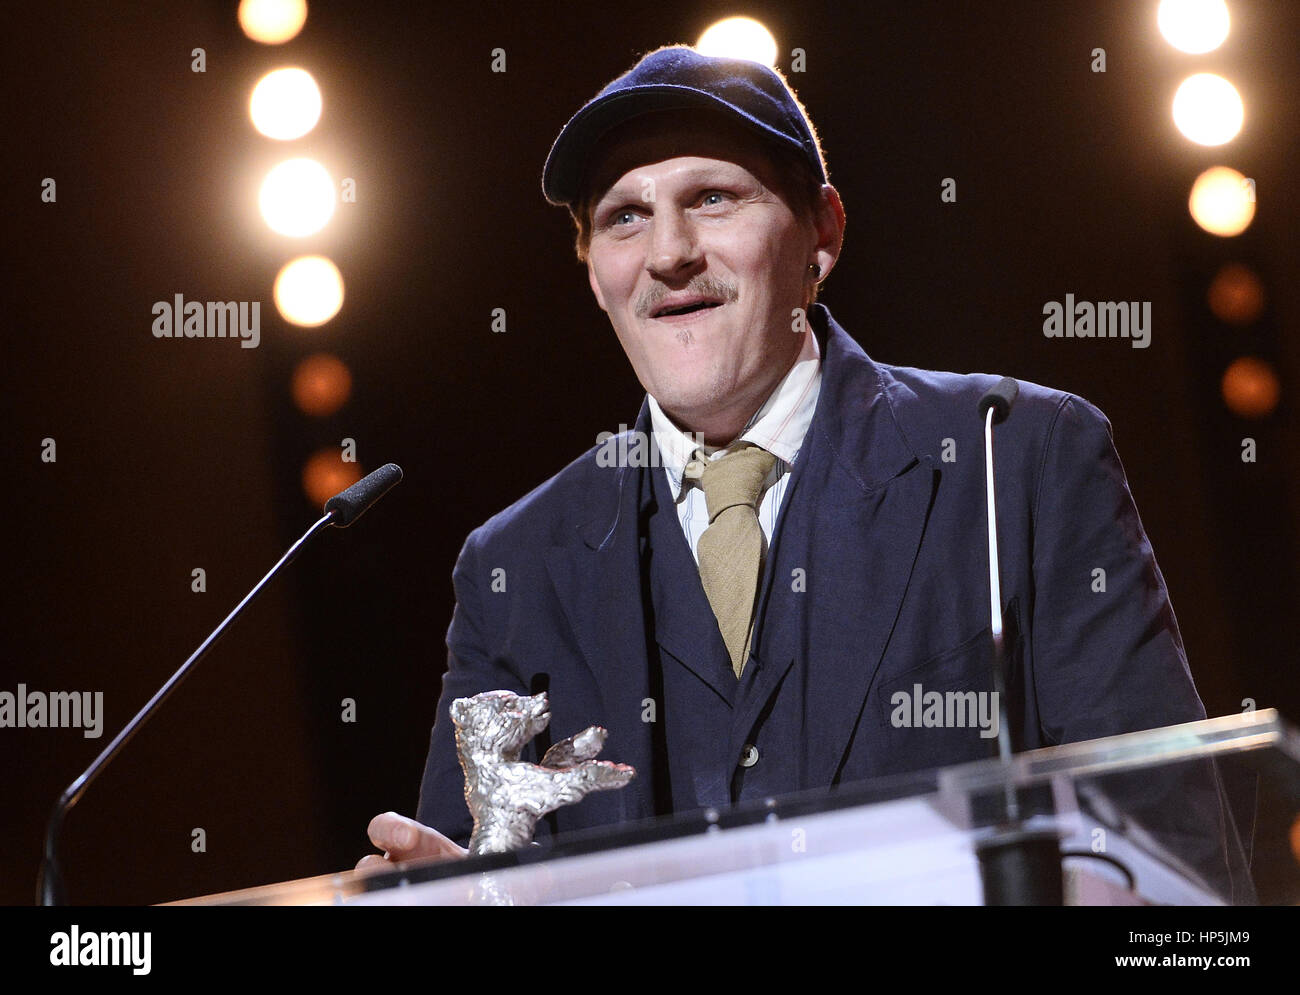 Berlin, Germany. 18th Feb, 2017. Austrian actor Georg Friedrich ('Wild Mouse') wins the Silver Bear for Best Actor at the awards ceremony of the 67th Berlinale Film Festival in Berlin, Germany, 18 February 2017. Eighteen films were entered into the competition. Photo: Gregor Fischer/dpa/Alamy Live News Stock Photo